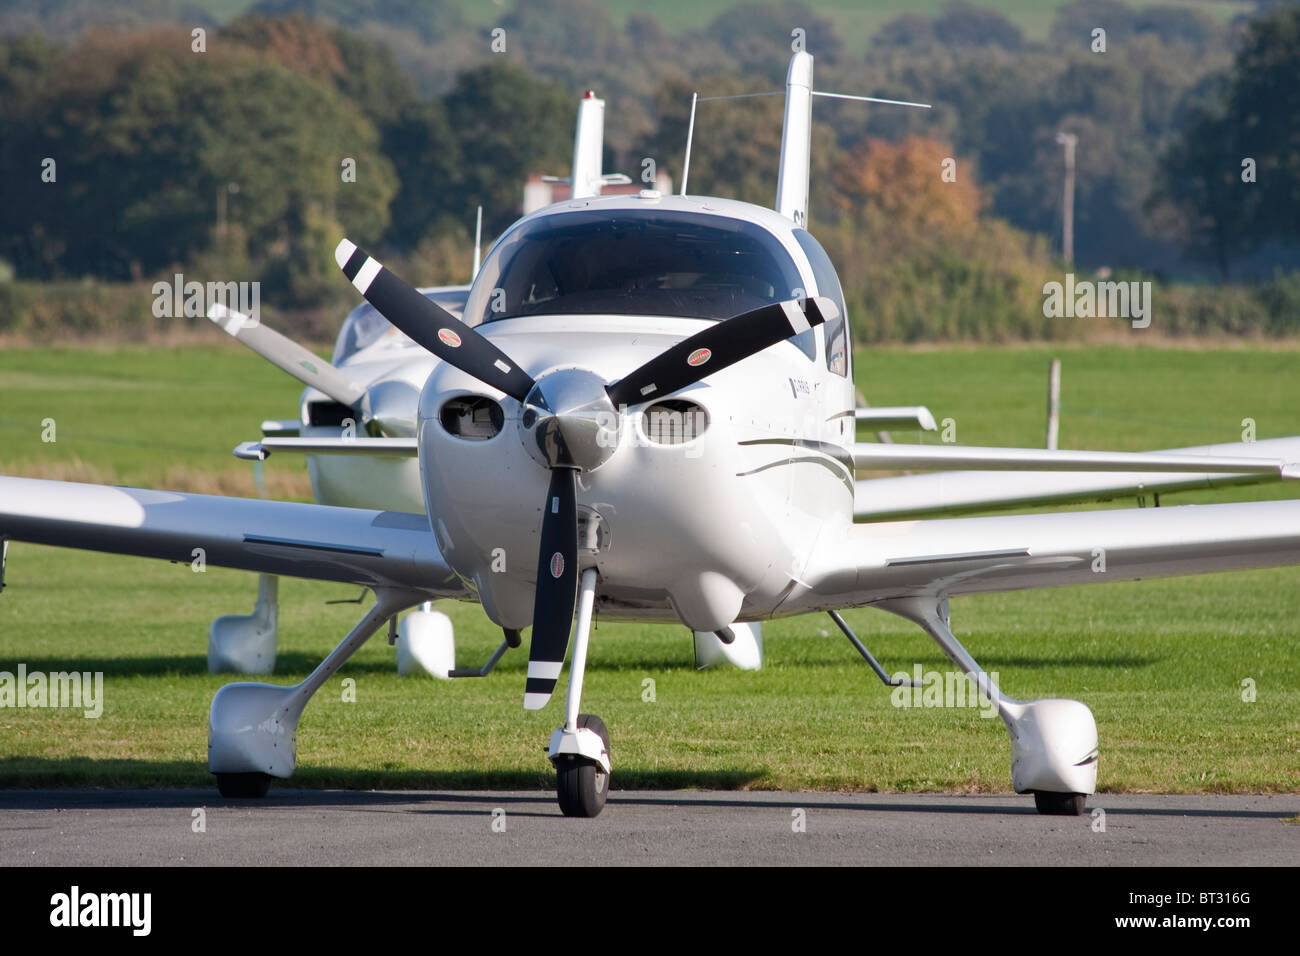 Close up view of a small single engine airplane Stock Photo